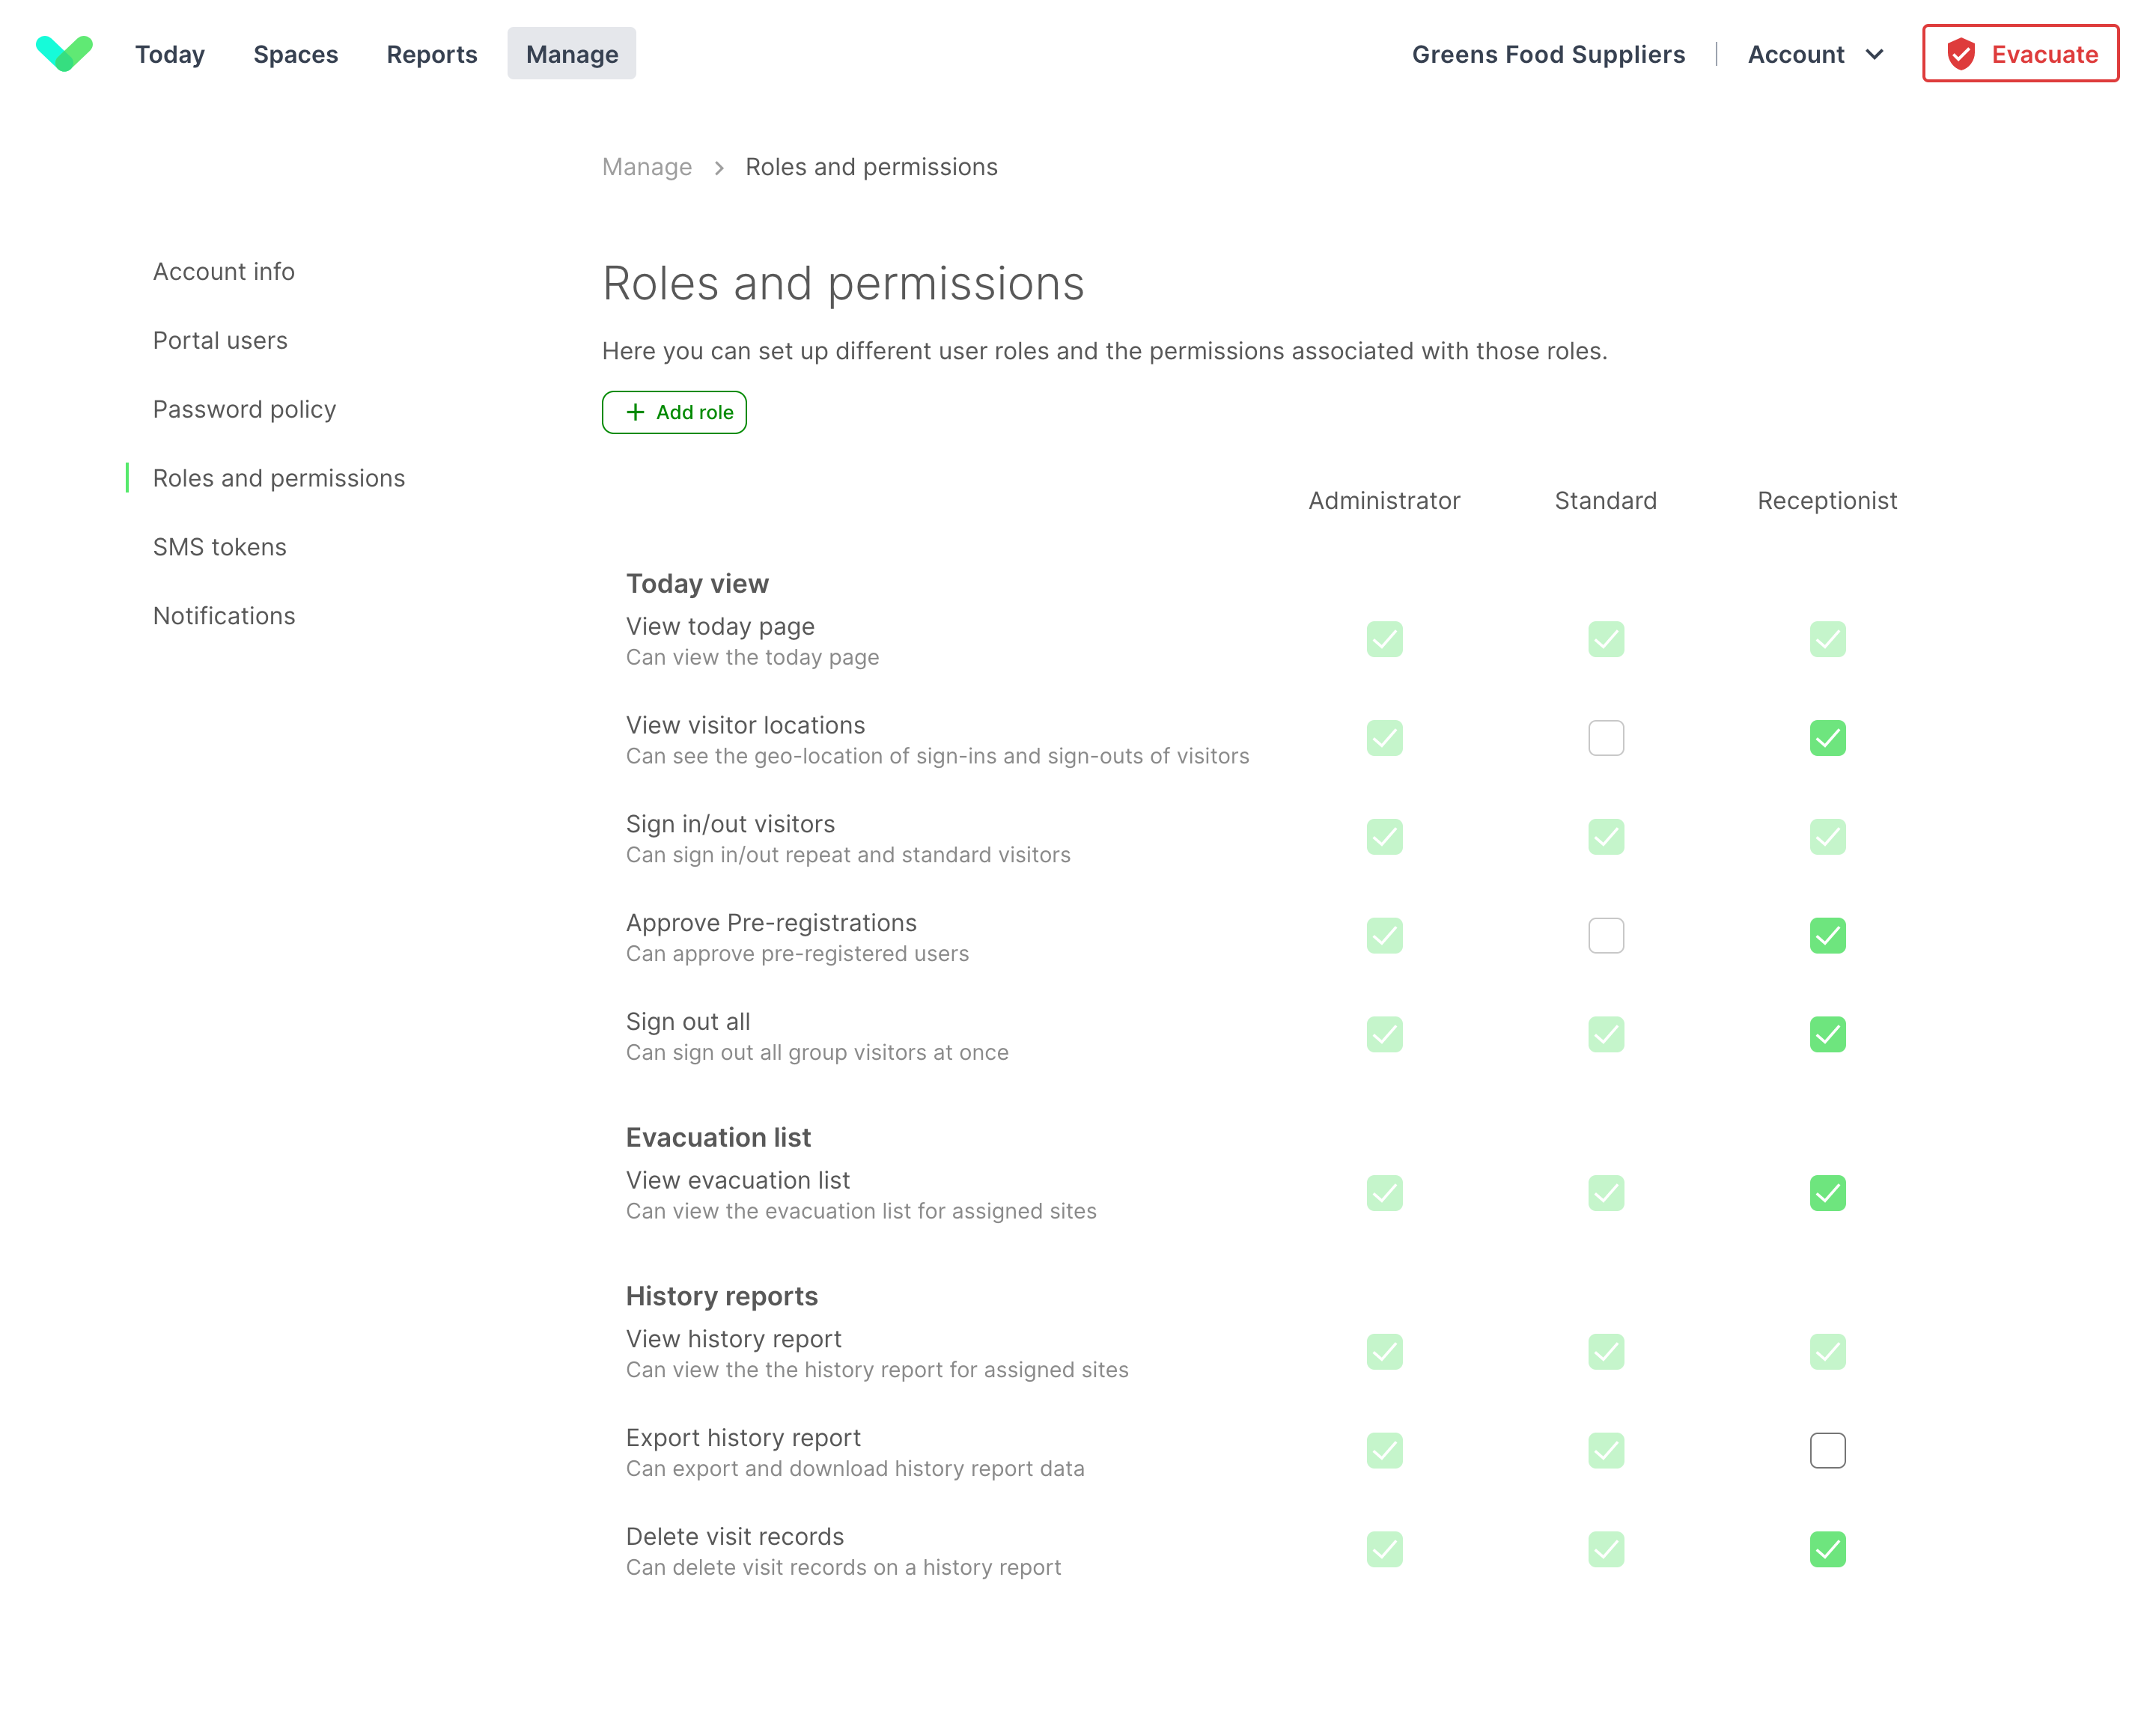 Showing the custom roles and permissions that can be configured from the Sign In App portal